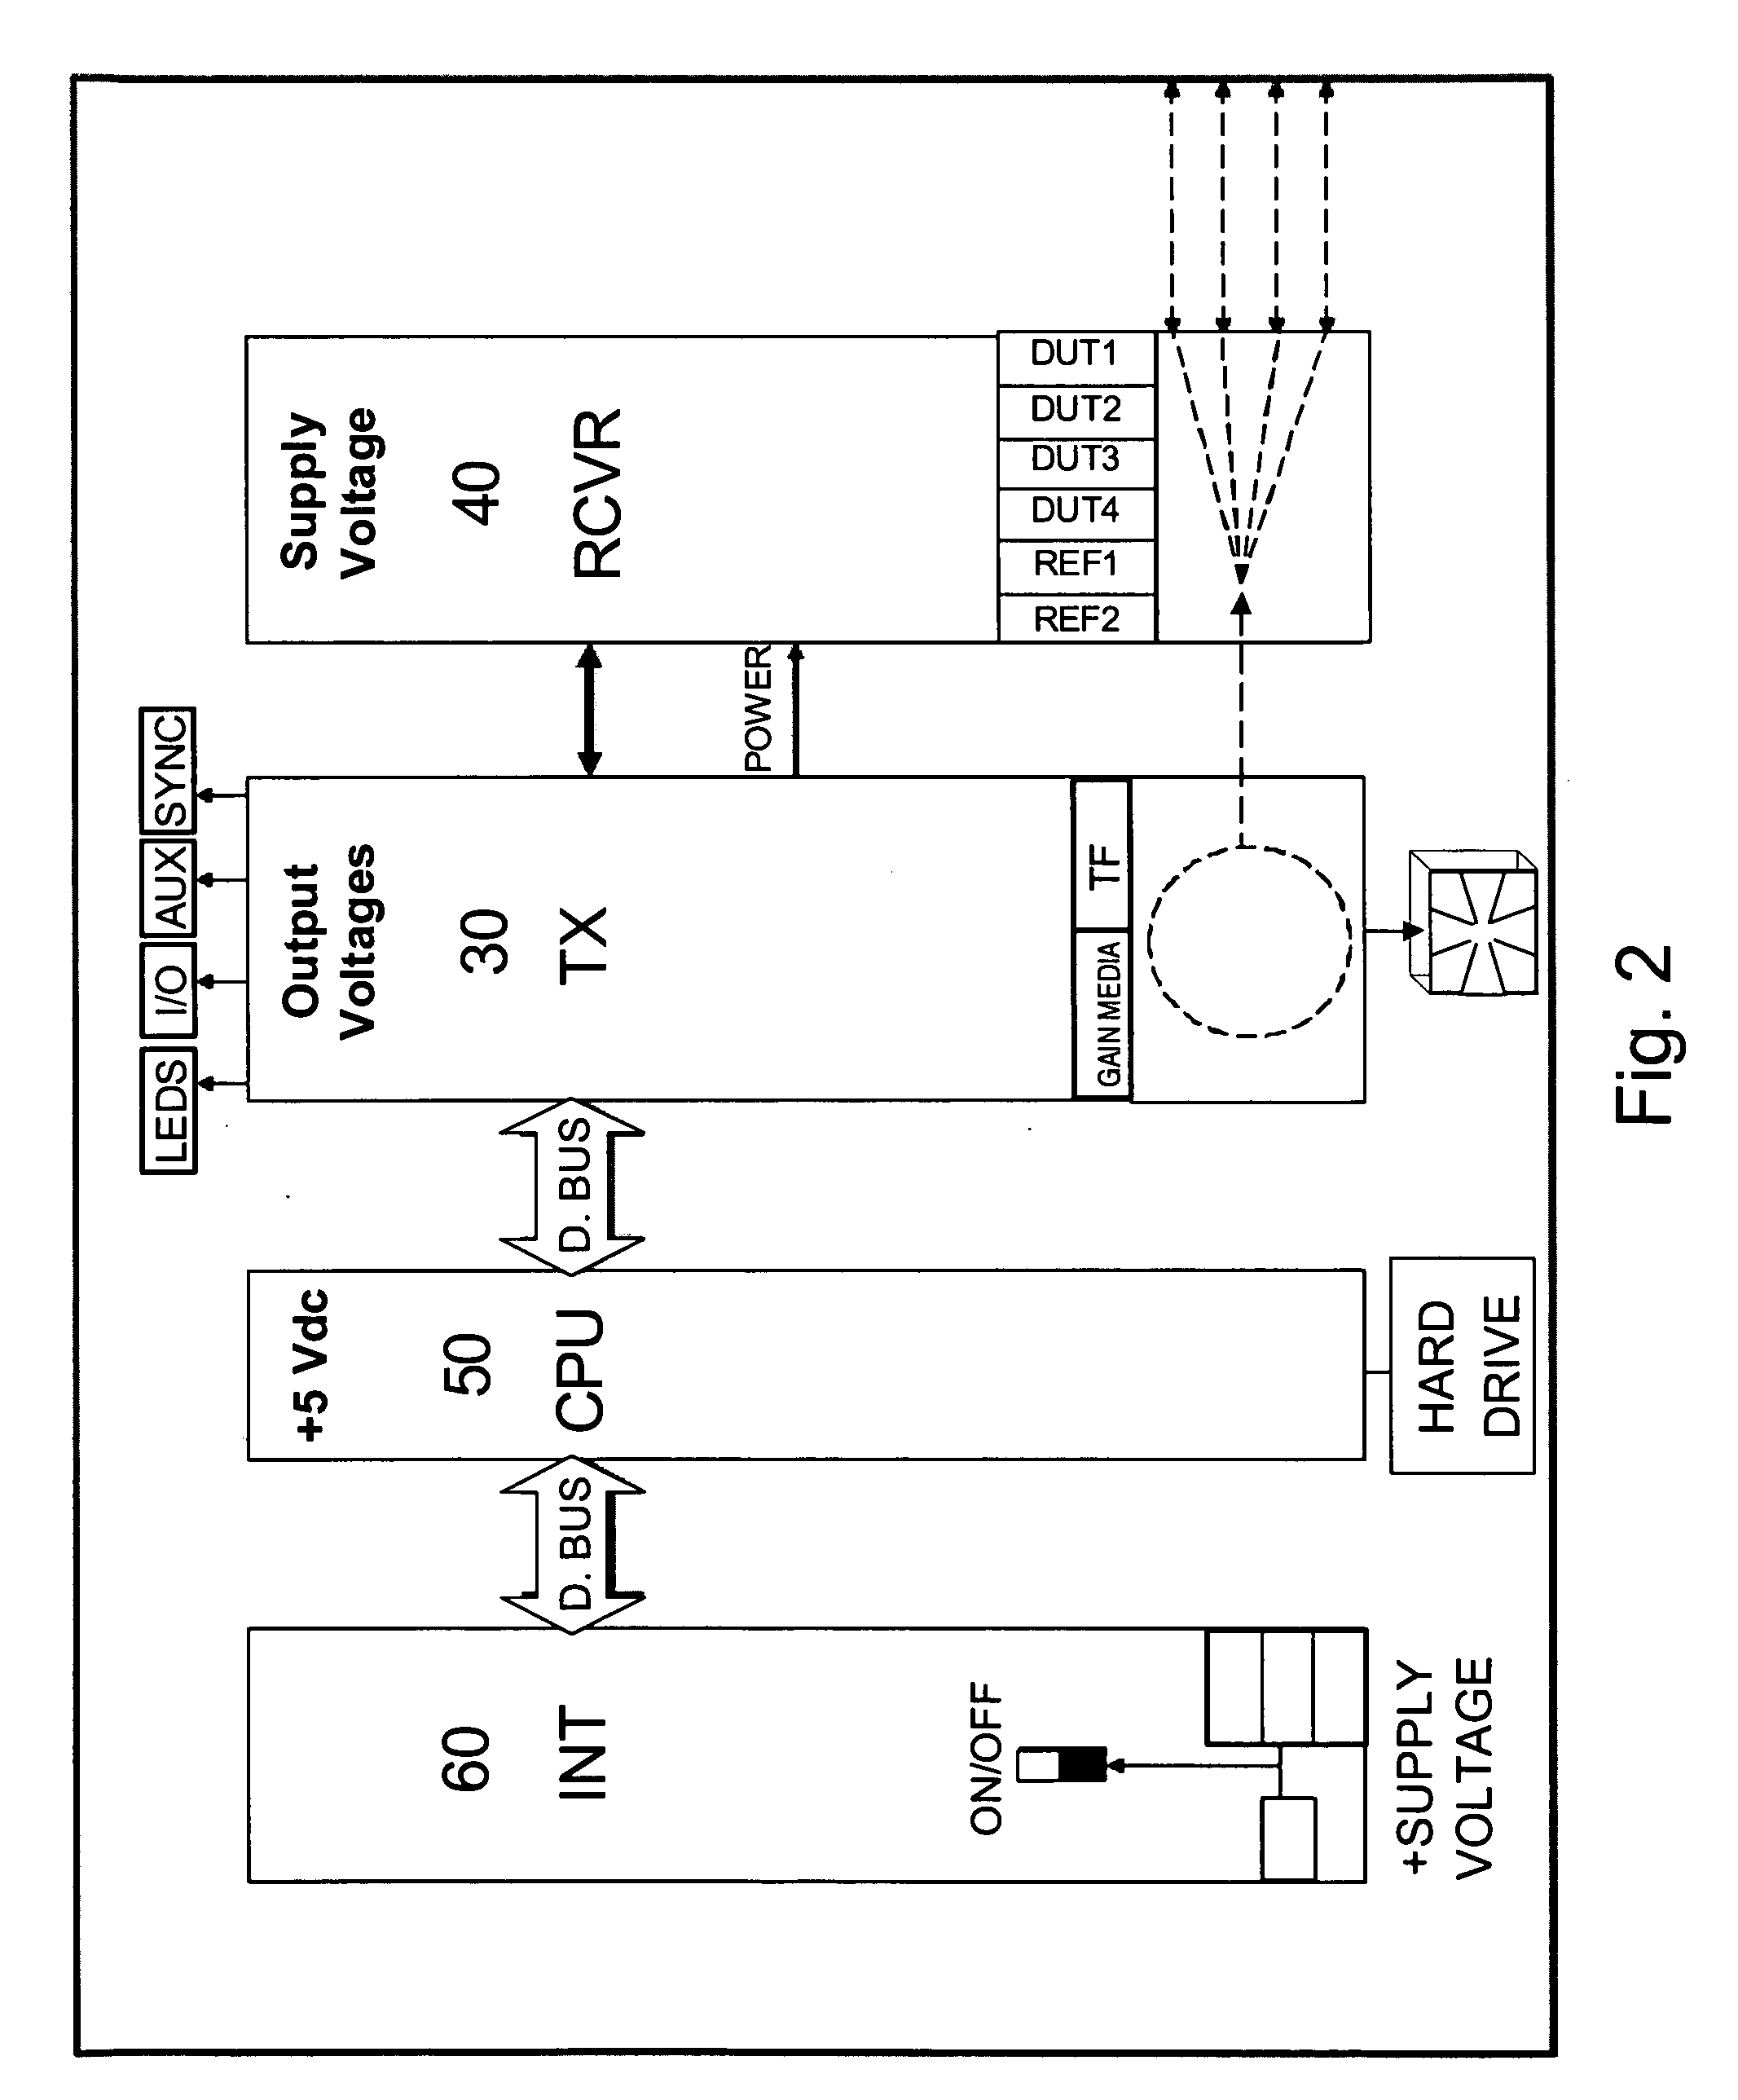 Method and Apparatus for Multiple Scan Rate Swept Wavelength Laser-Based Optical Sensor Interrogation System with Optical Path Length Measurement Capability